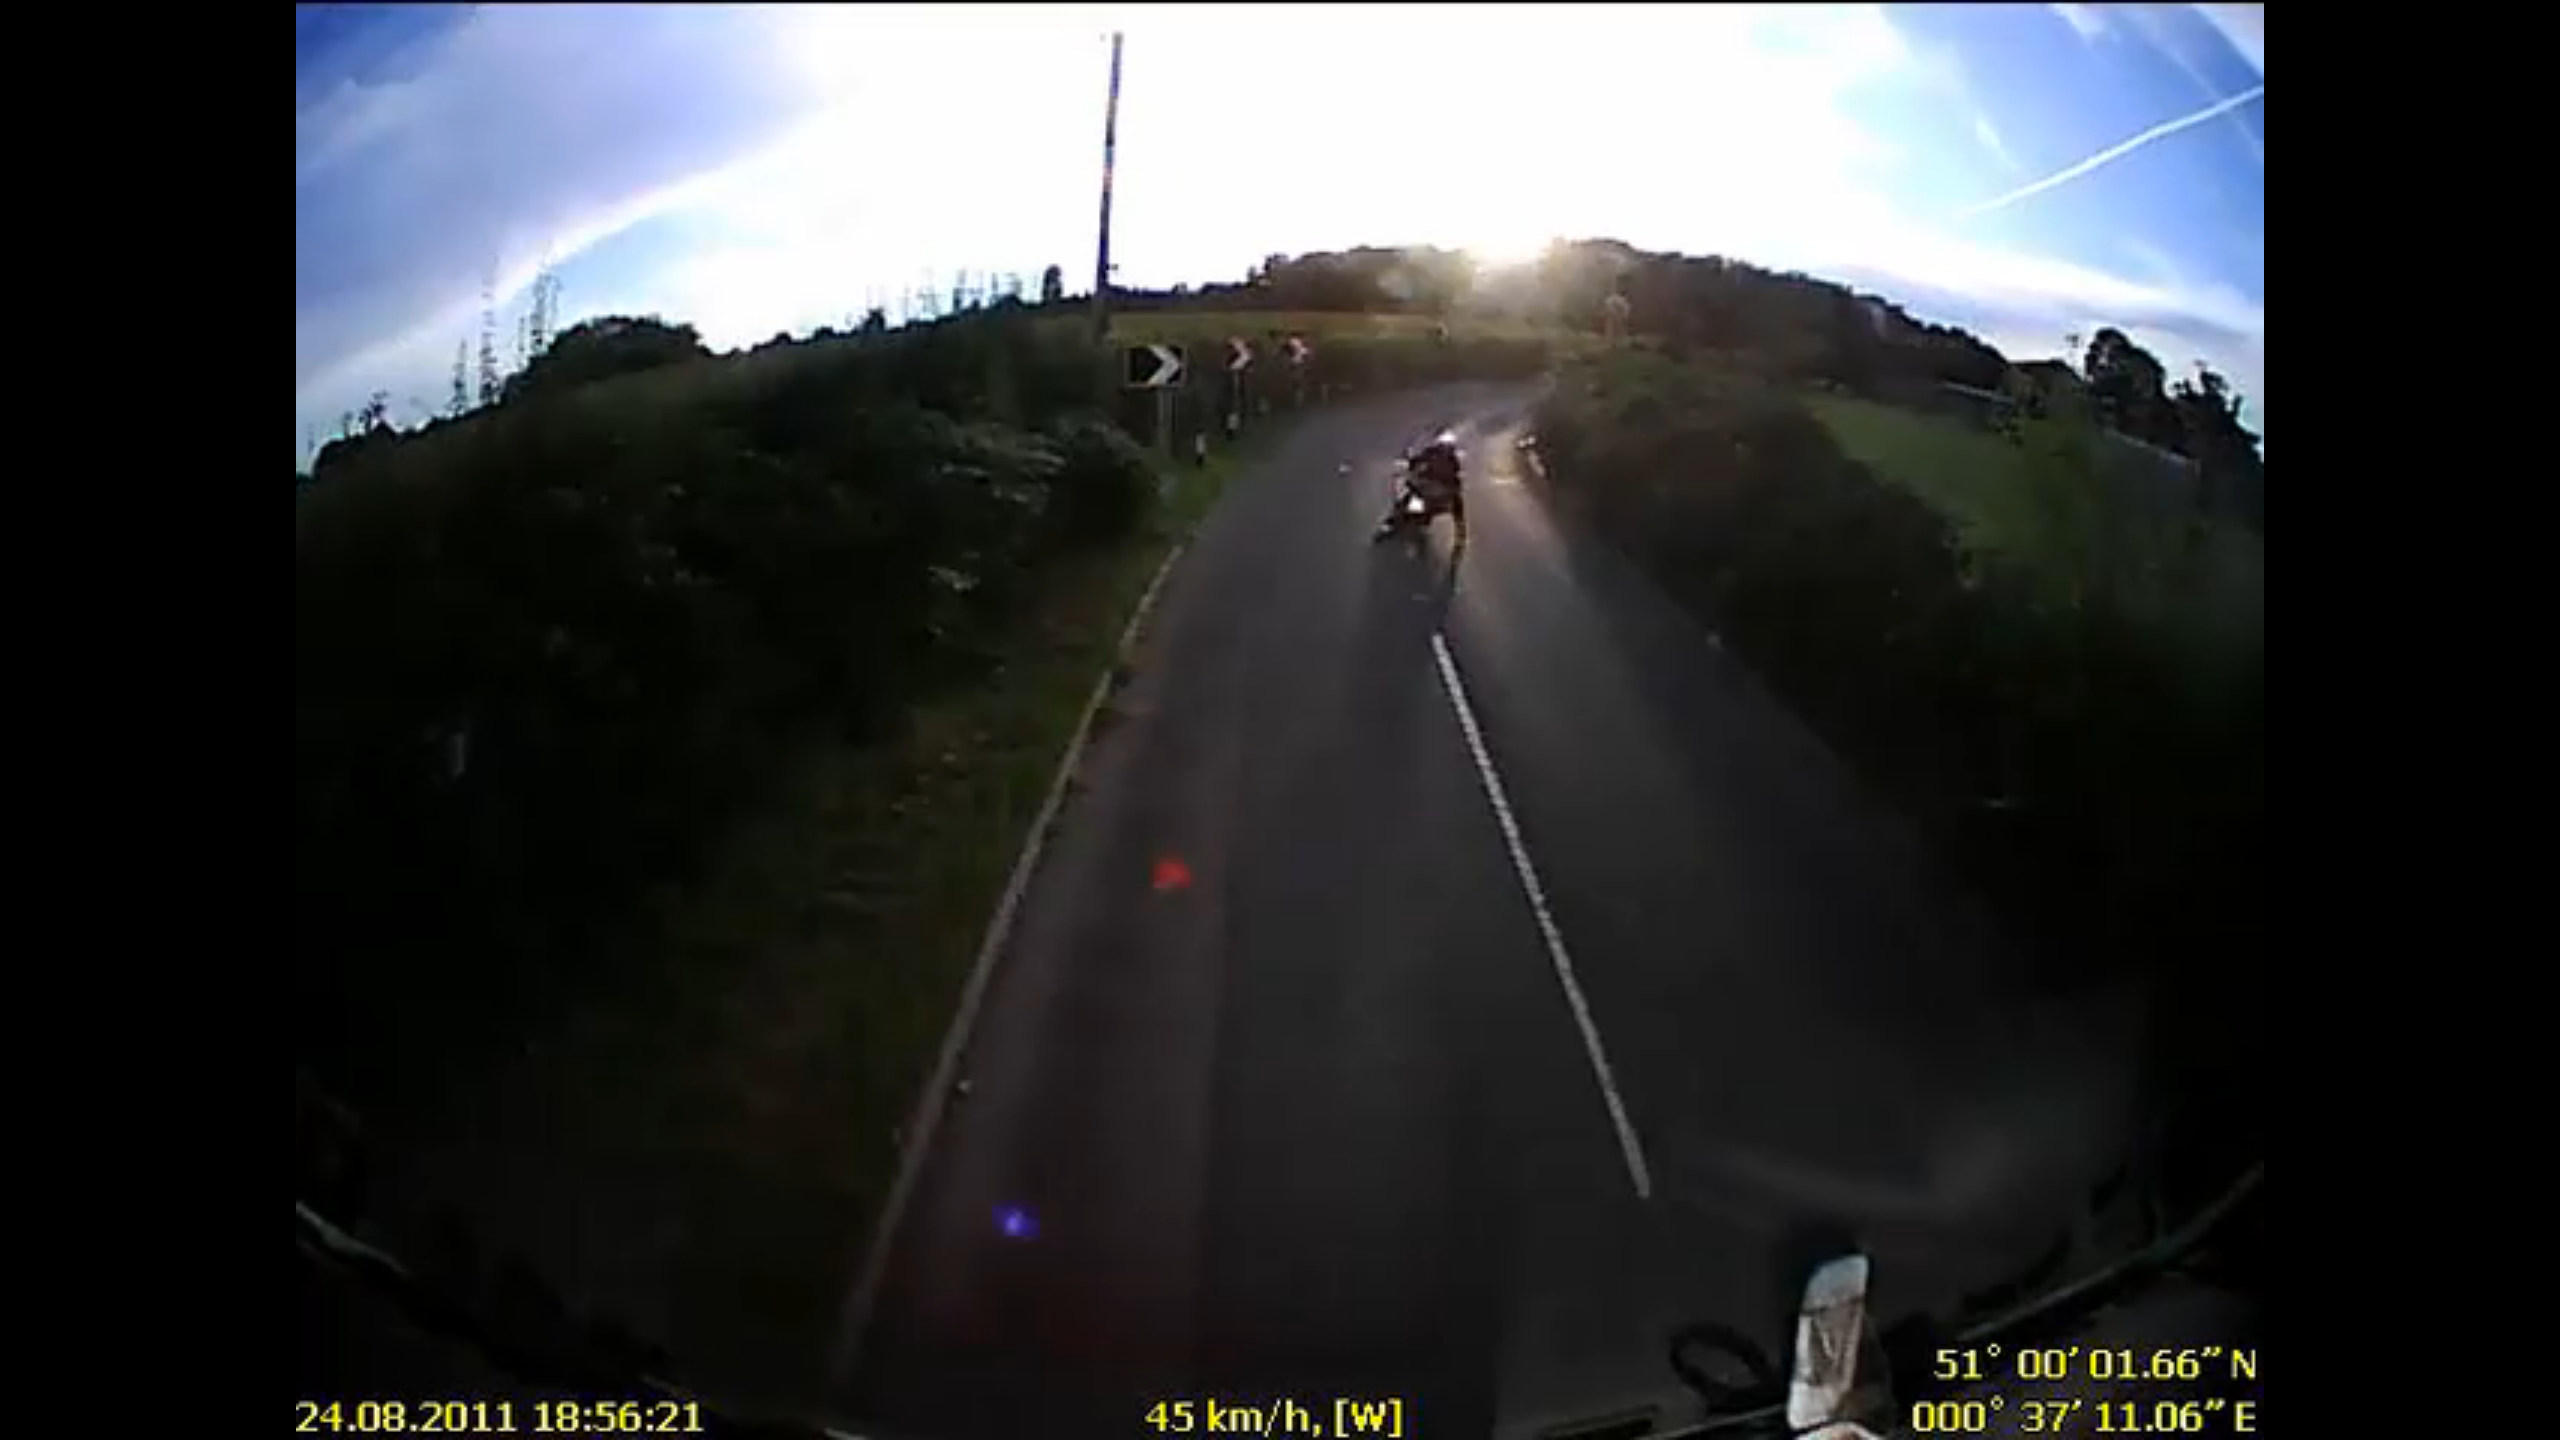 The biker somehow escaped with just a broken shoulder